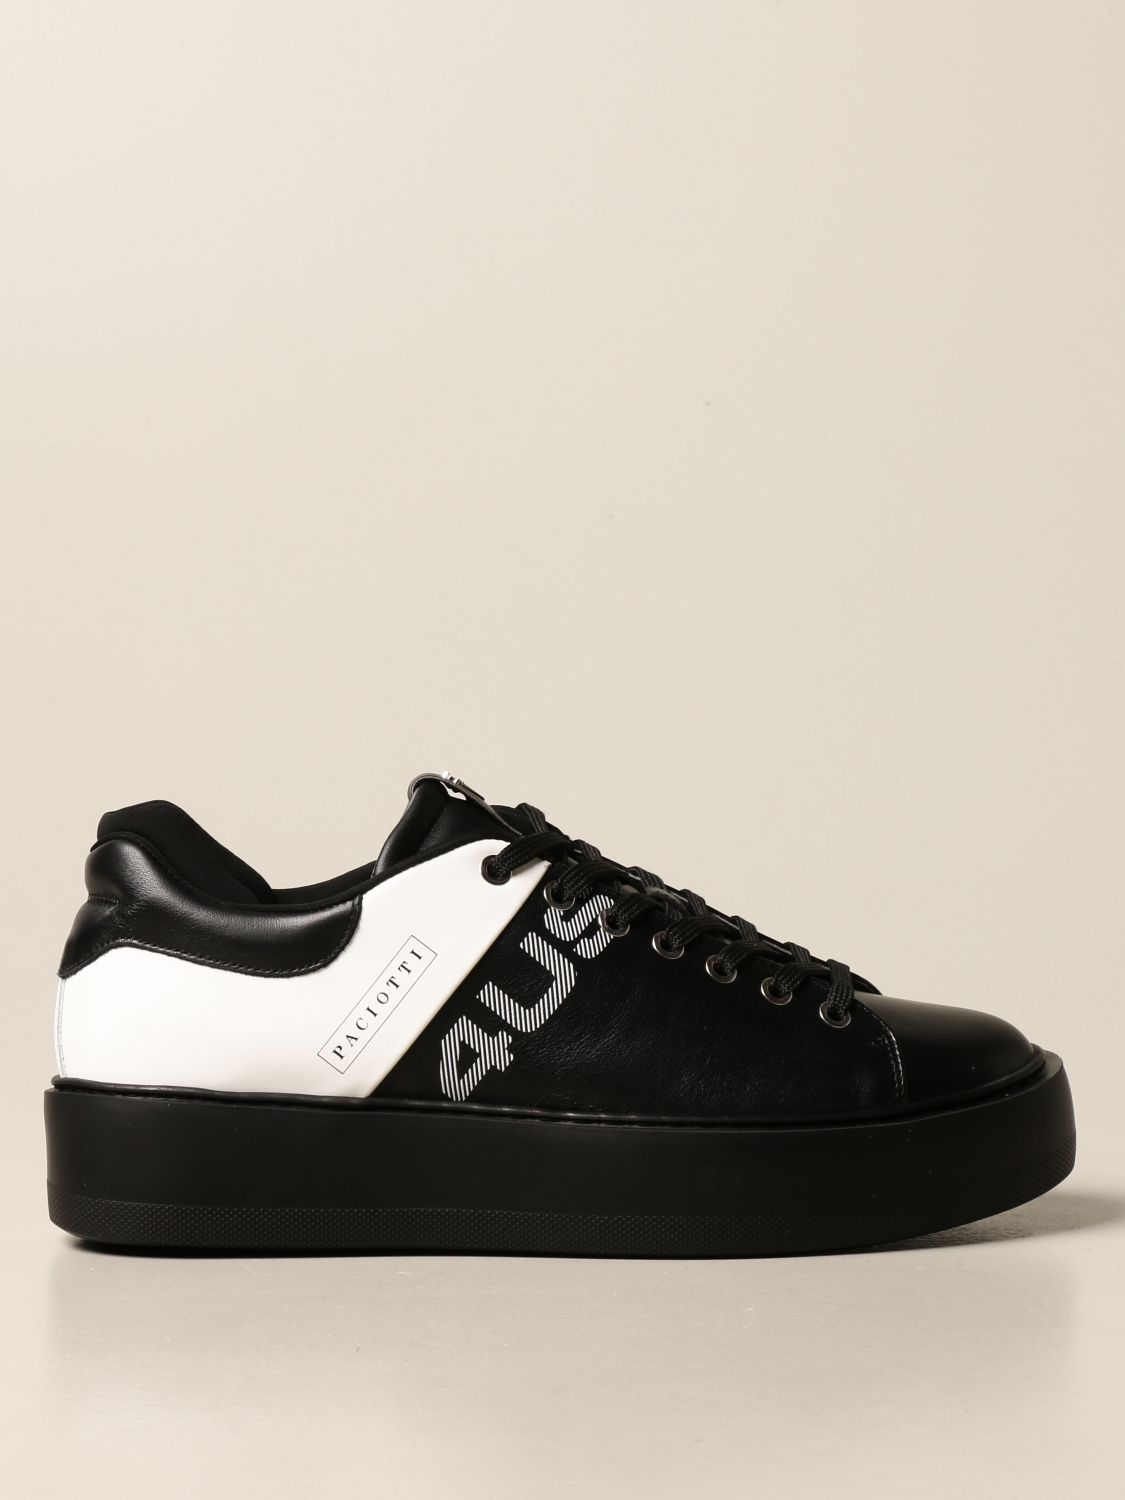 Paciotti 4Us Outlet: trainers for men - Black | Paciotti 4Us trainers ...